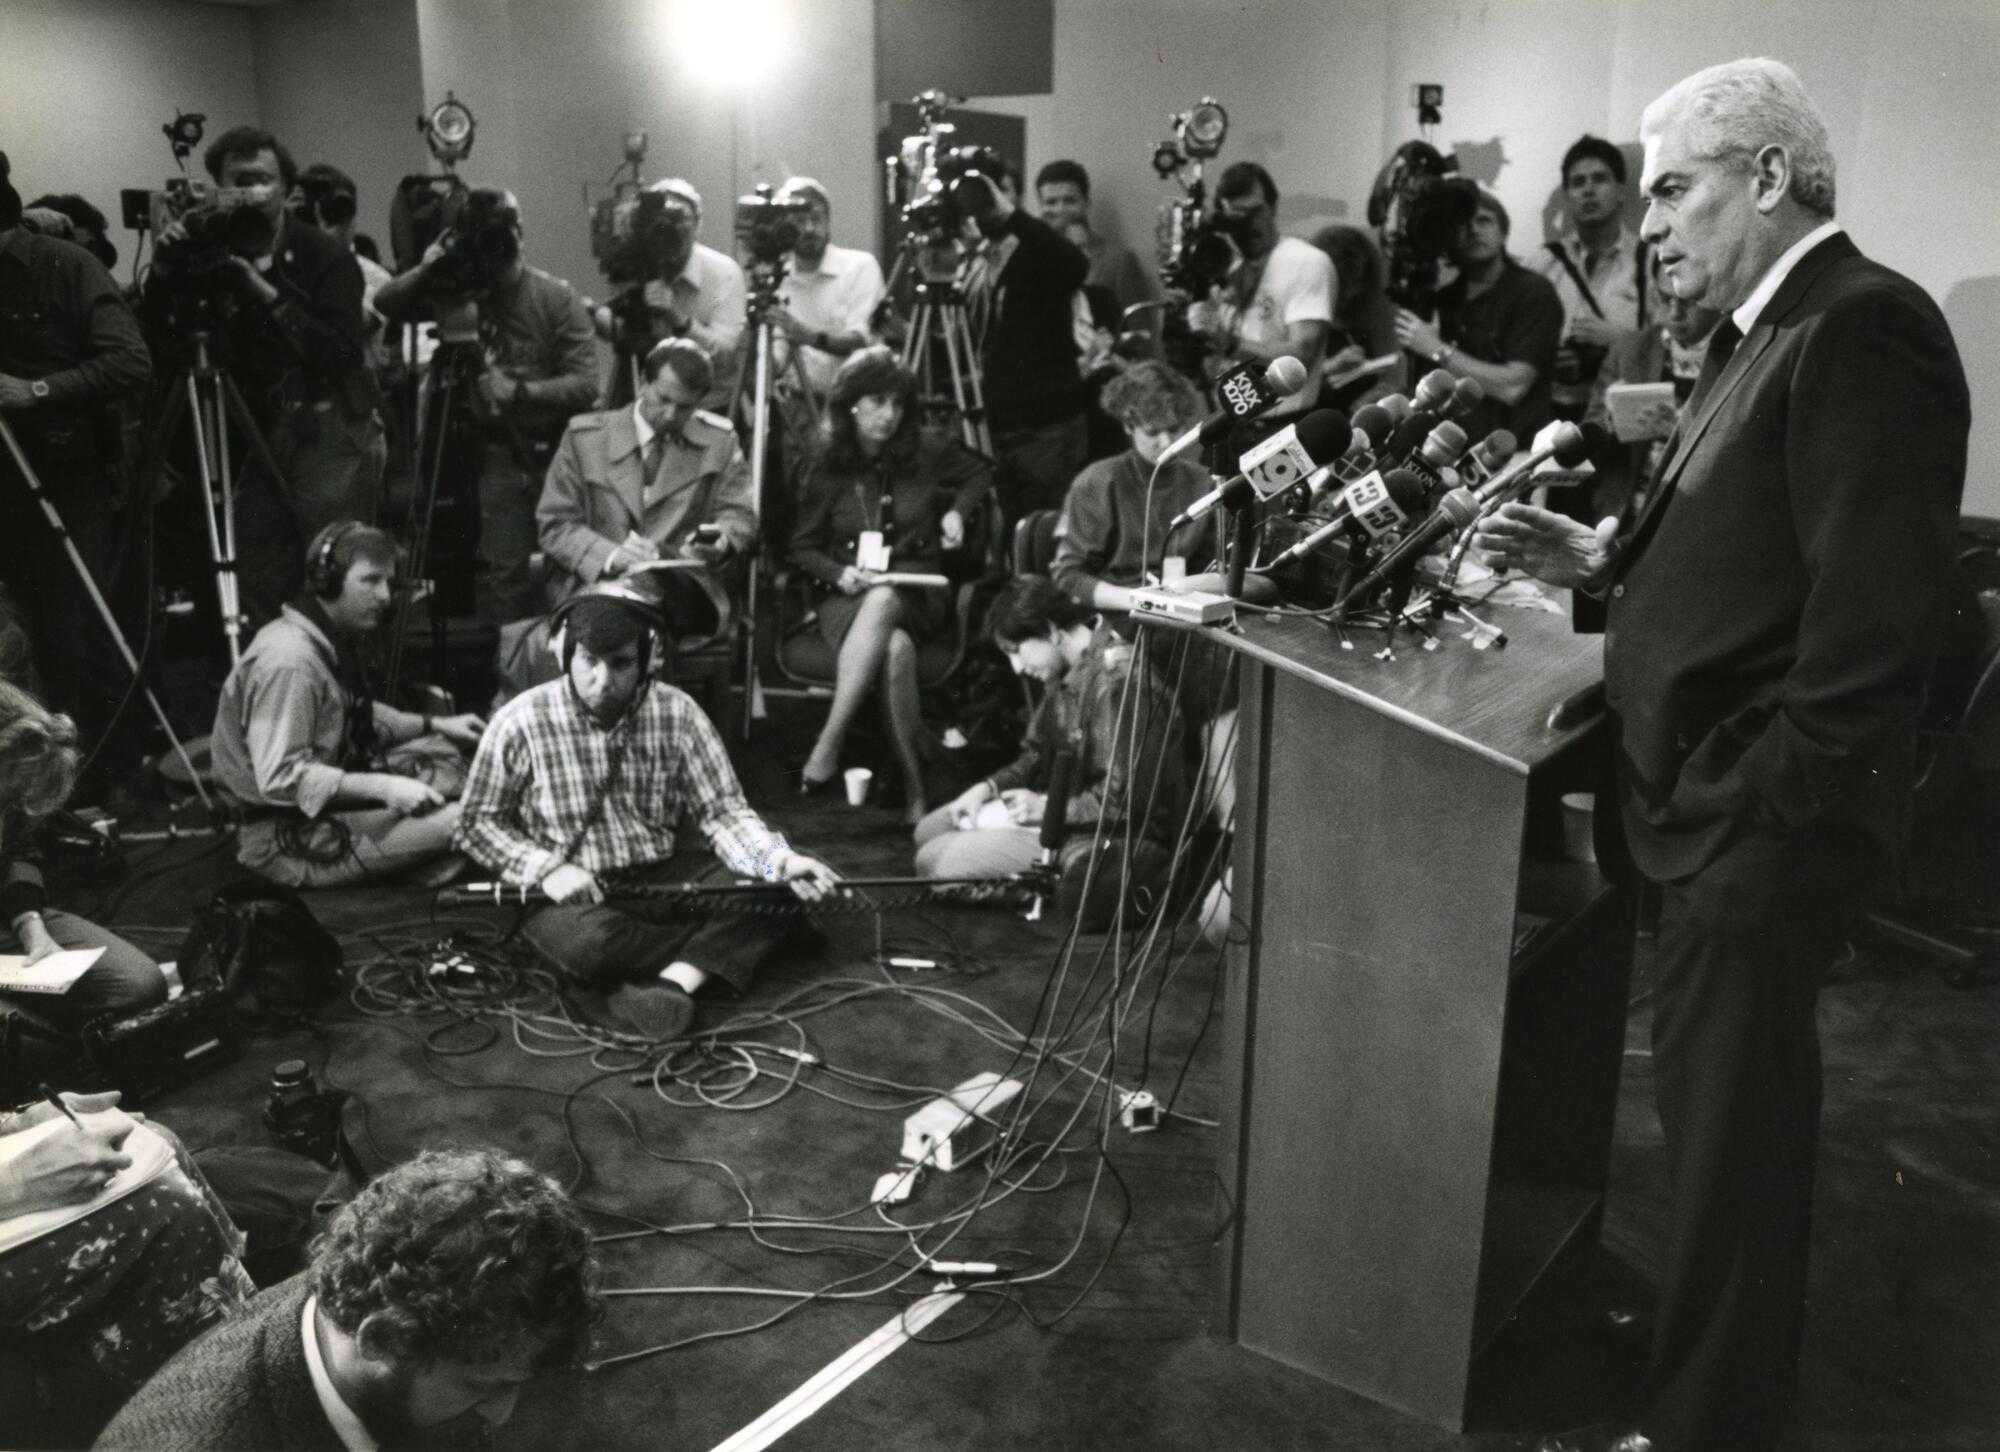 A man addresses a room crowded with journalists, cameras and microphones.